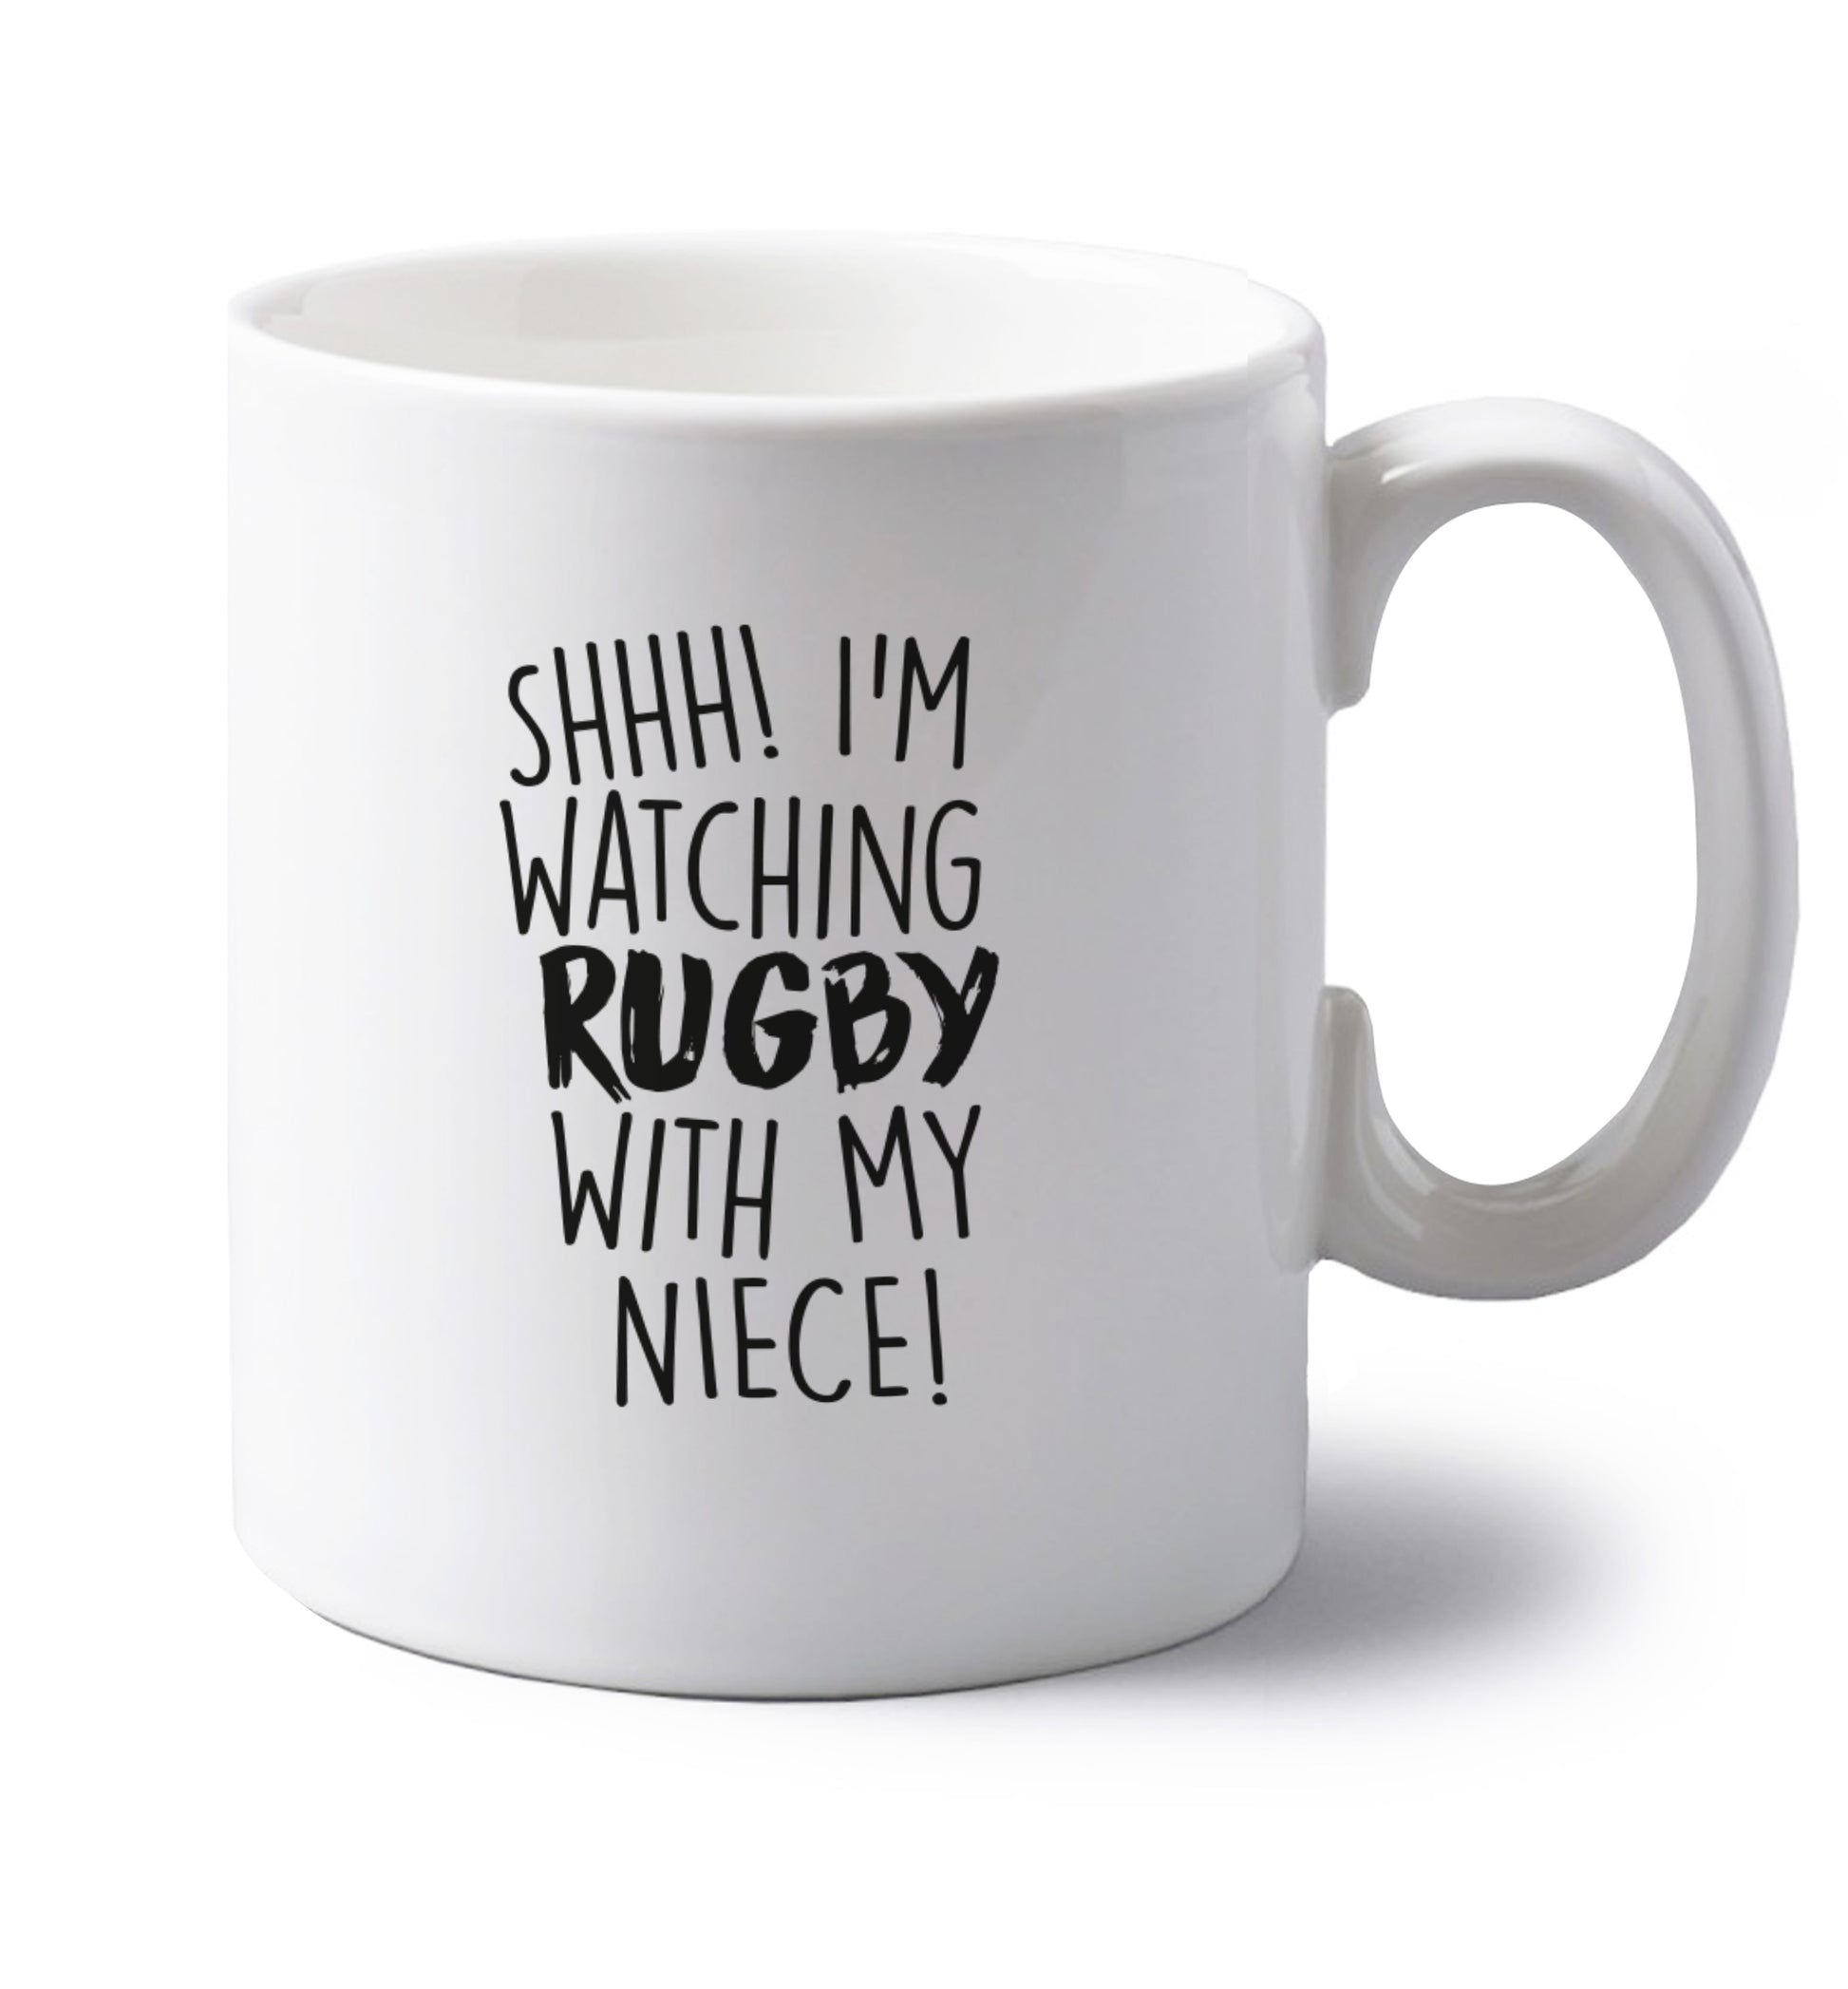 Shh.. I'm watching rugby with my niece left handed white ceramic mug 